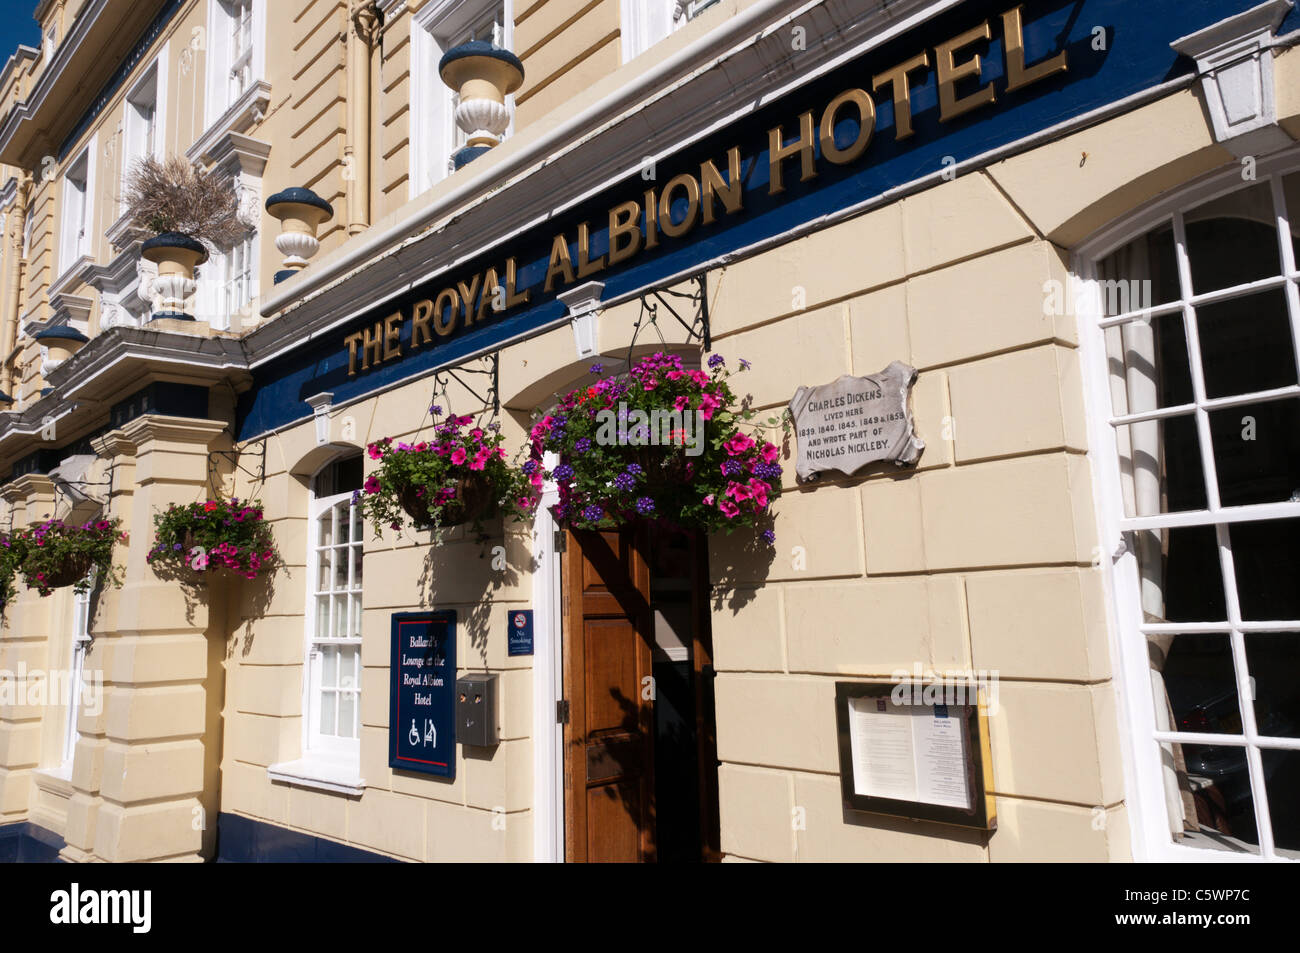 The Royal Albion Hotel in Broadstairs, Kent Stock Photo